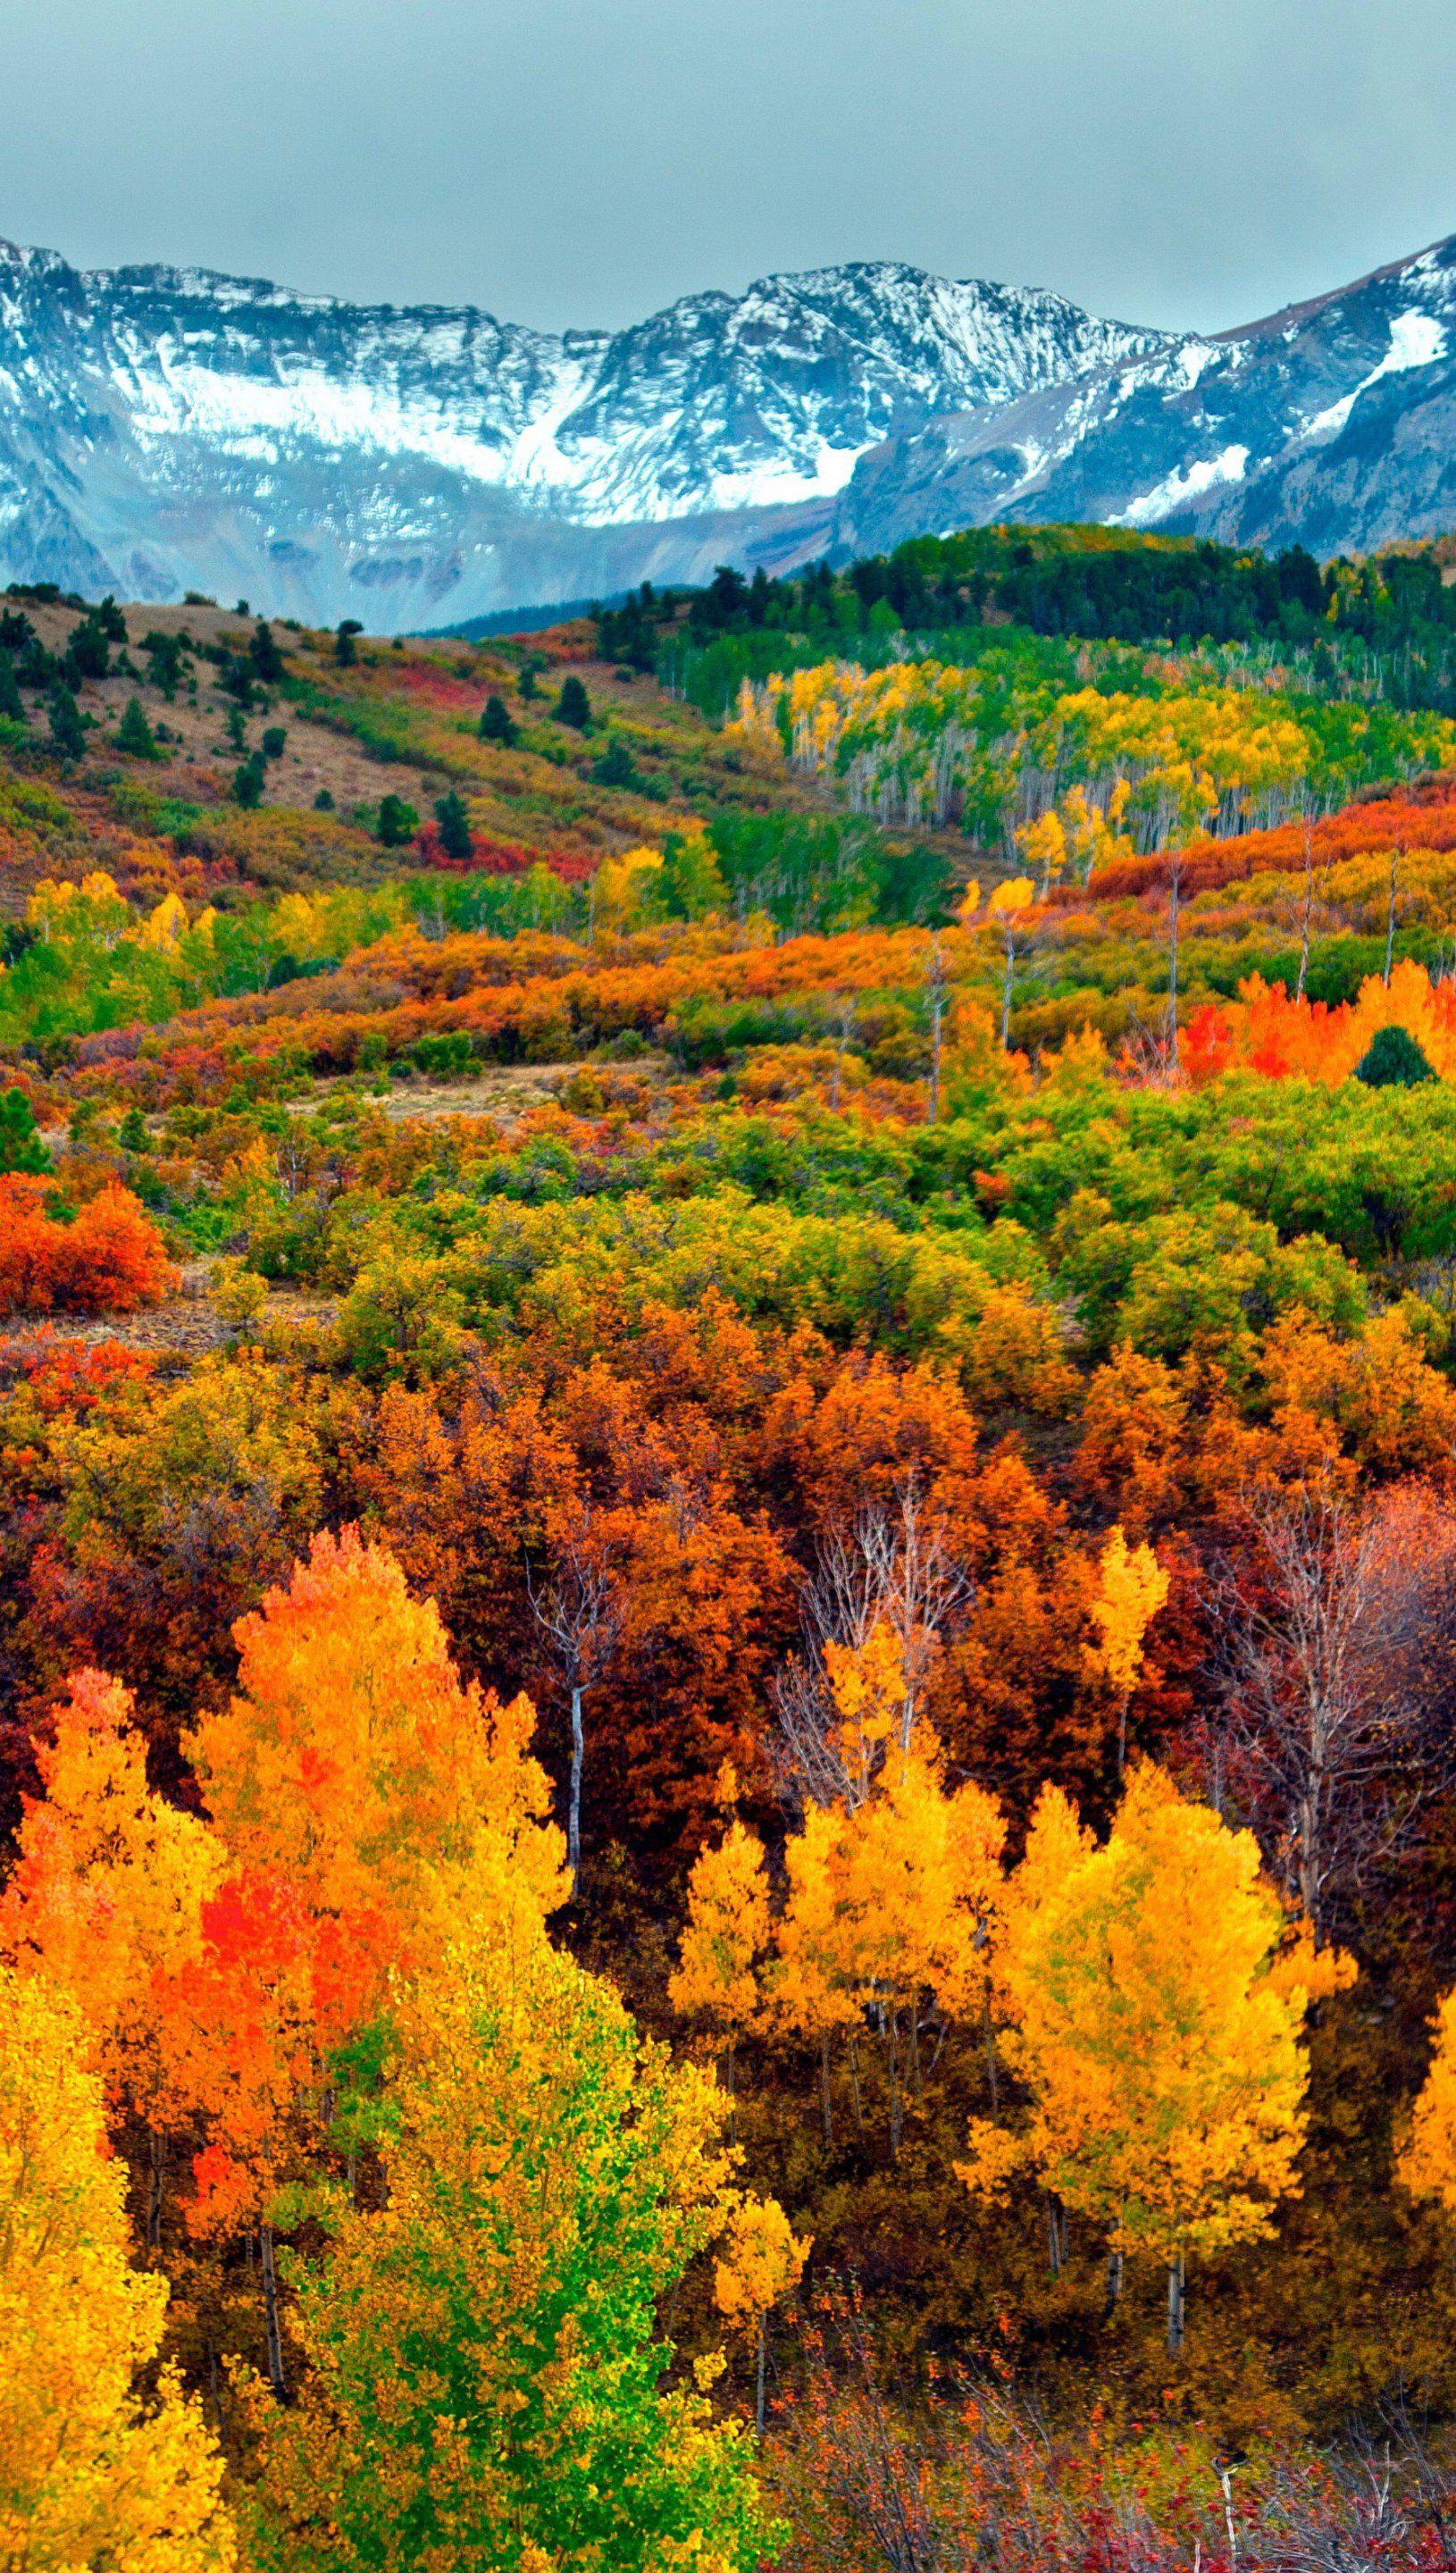 Mountains and forest in autumn Wallpaper 5k Ultra HD